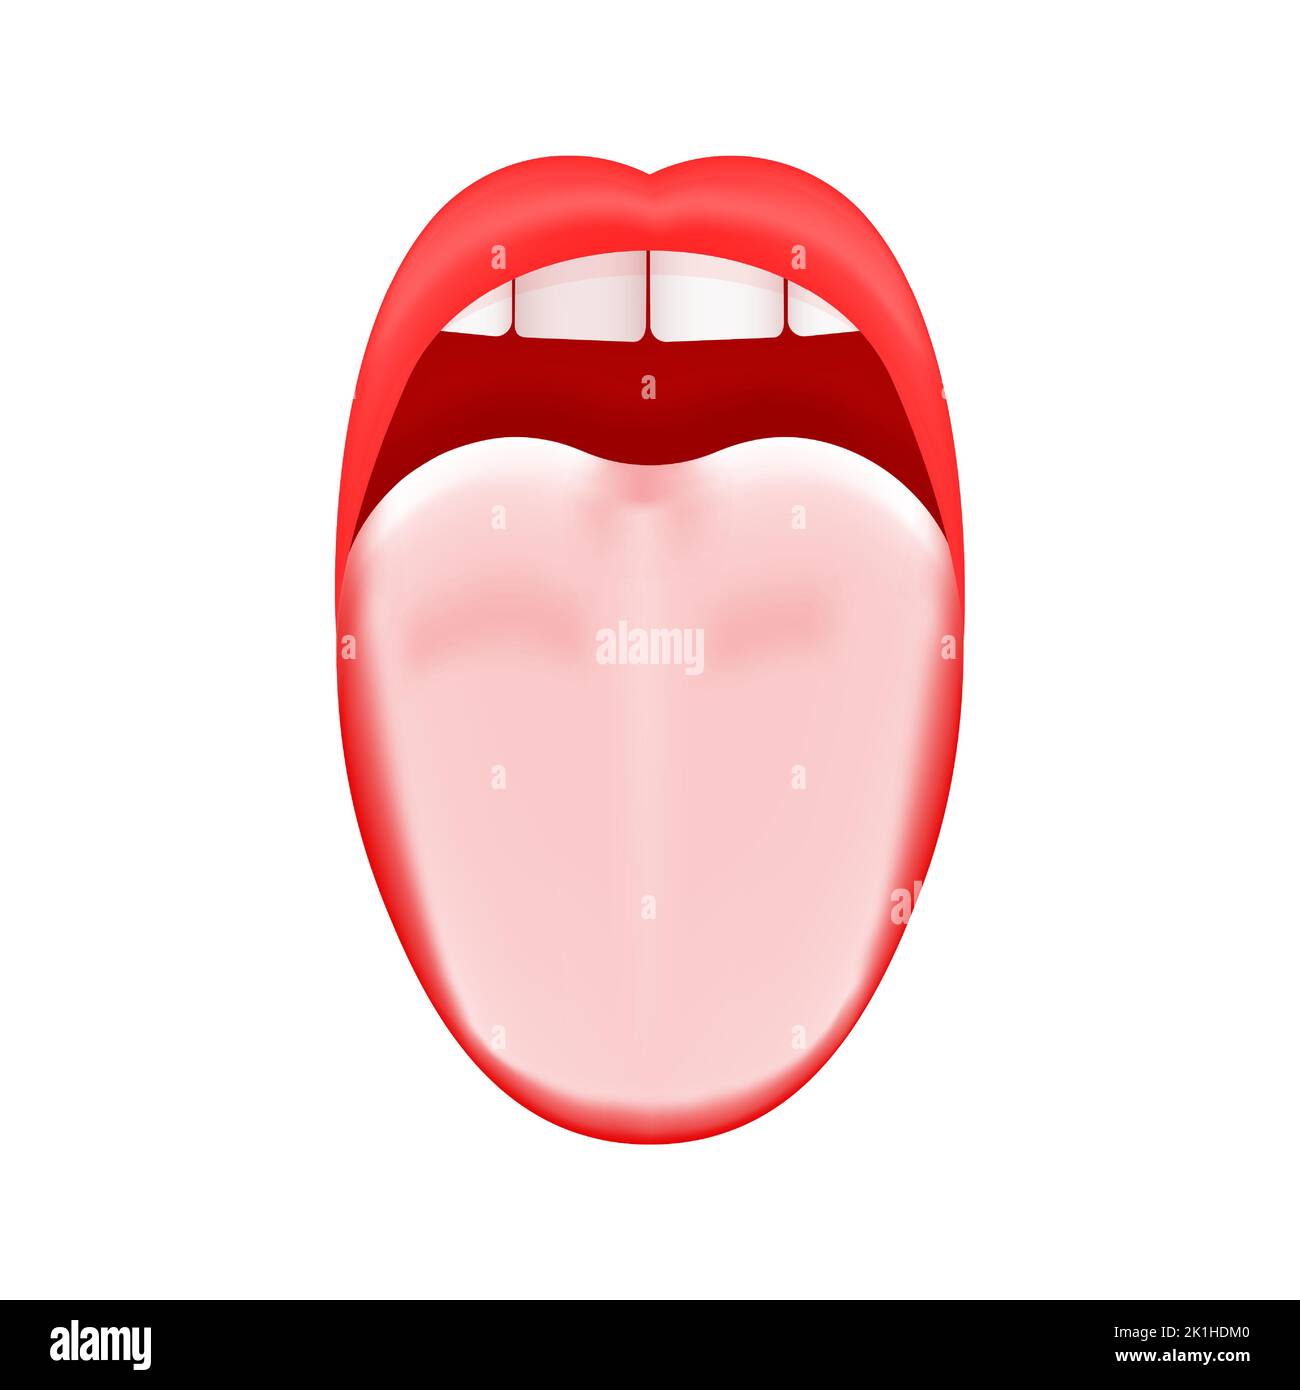 White or coated tongue. Dry mouth. Open human taste organ with symptoms of stomatitis, candidiasis or glossitis bacterial infection isolated on white background. Vector realistic illustration Stock Vector